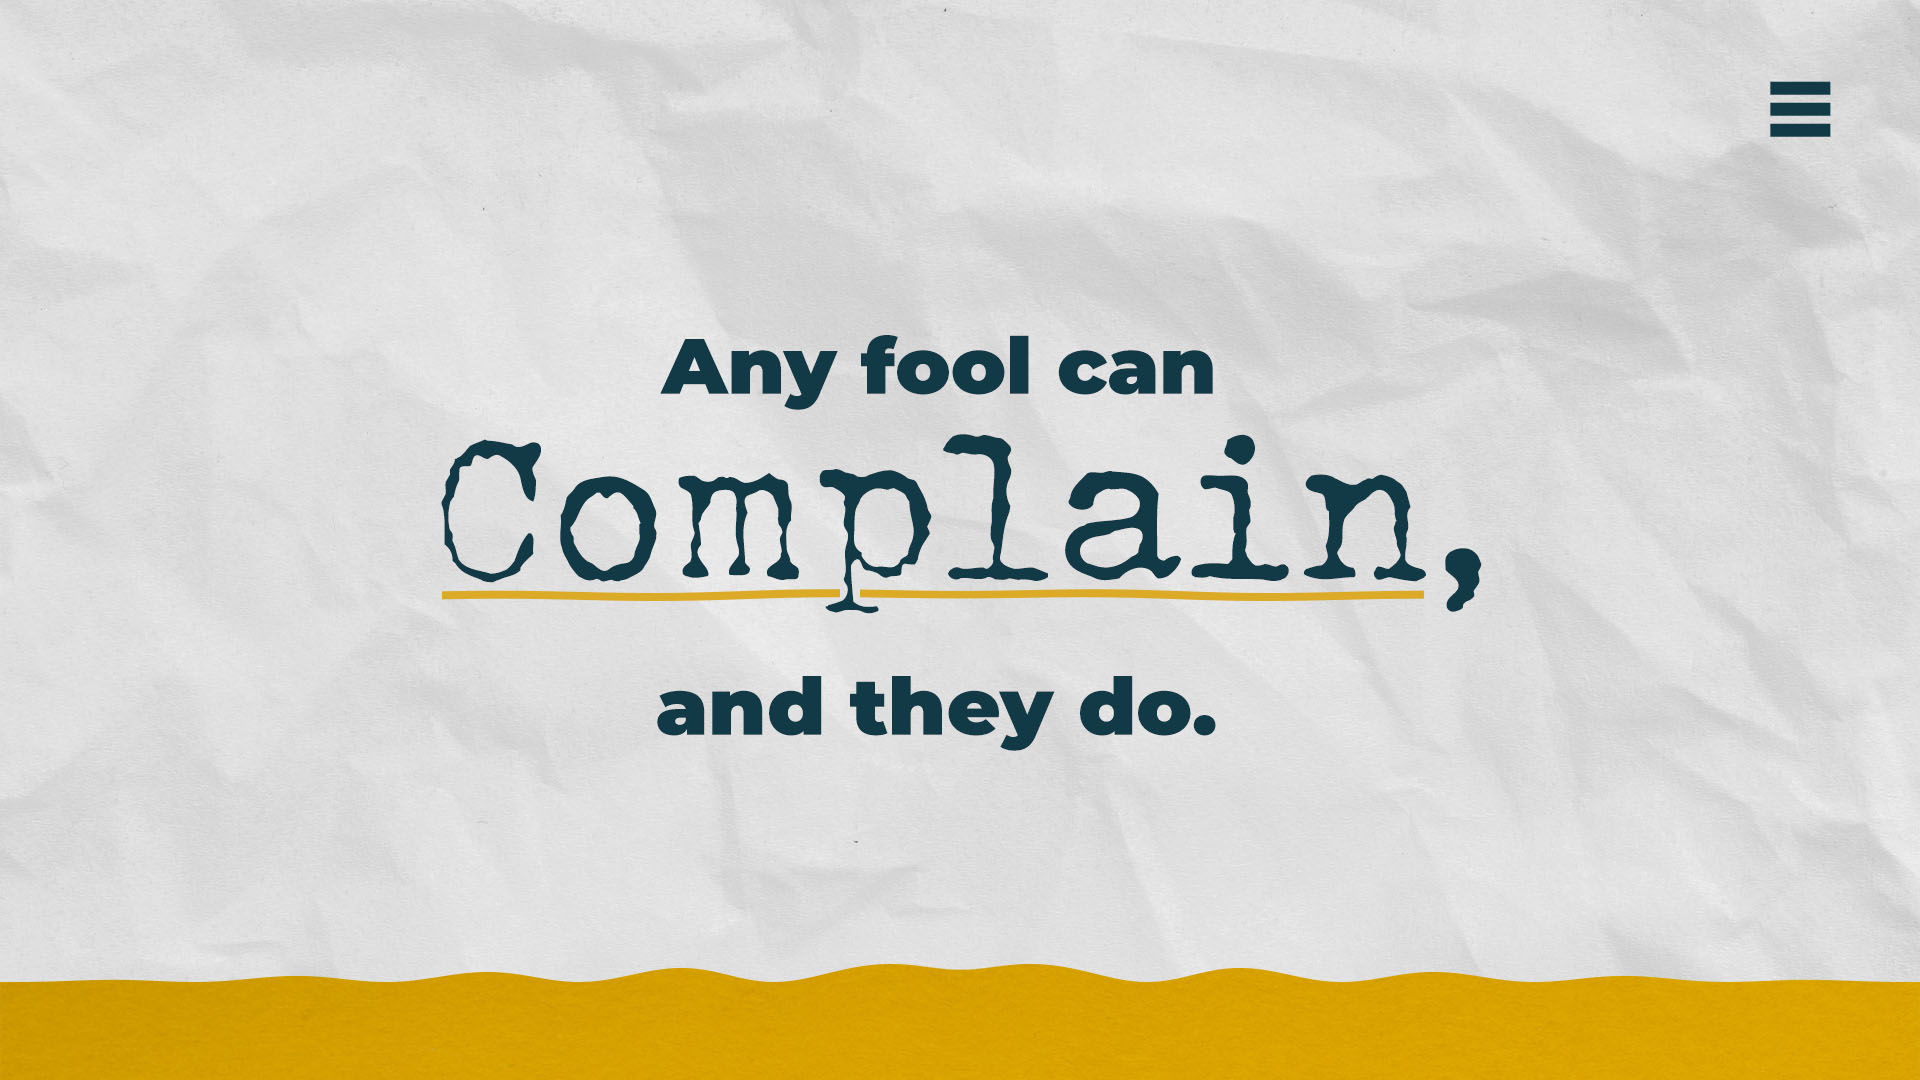 Any fool can complain and they do